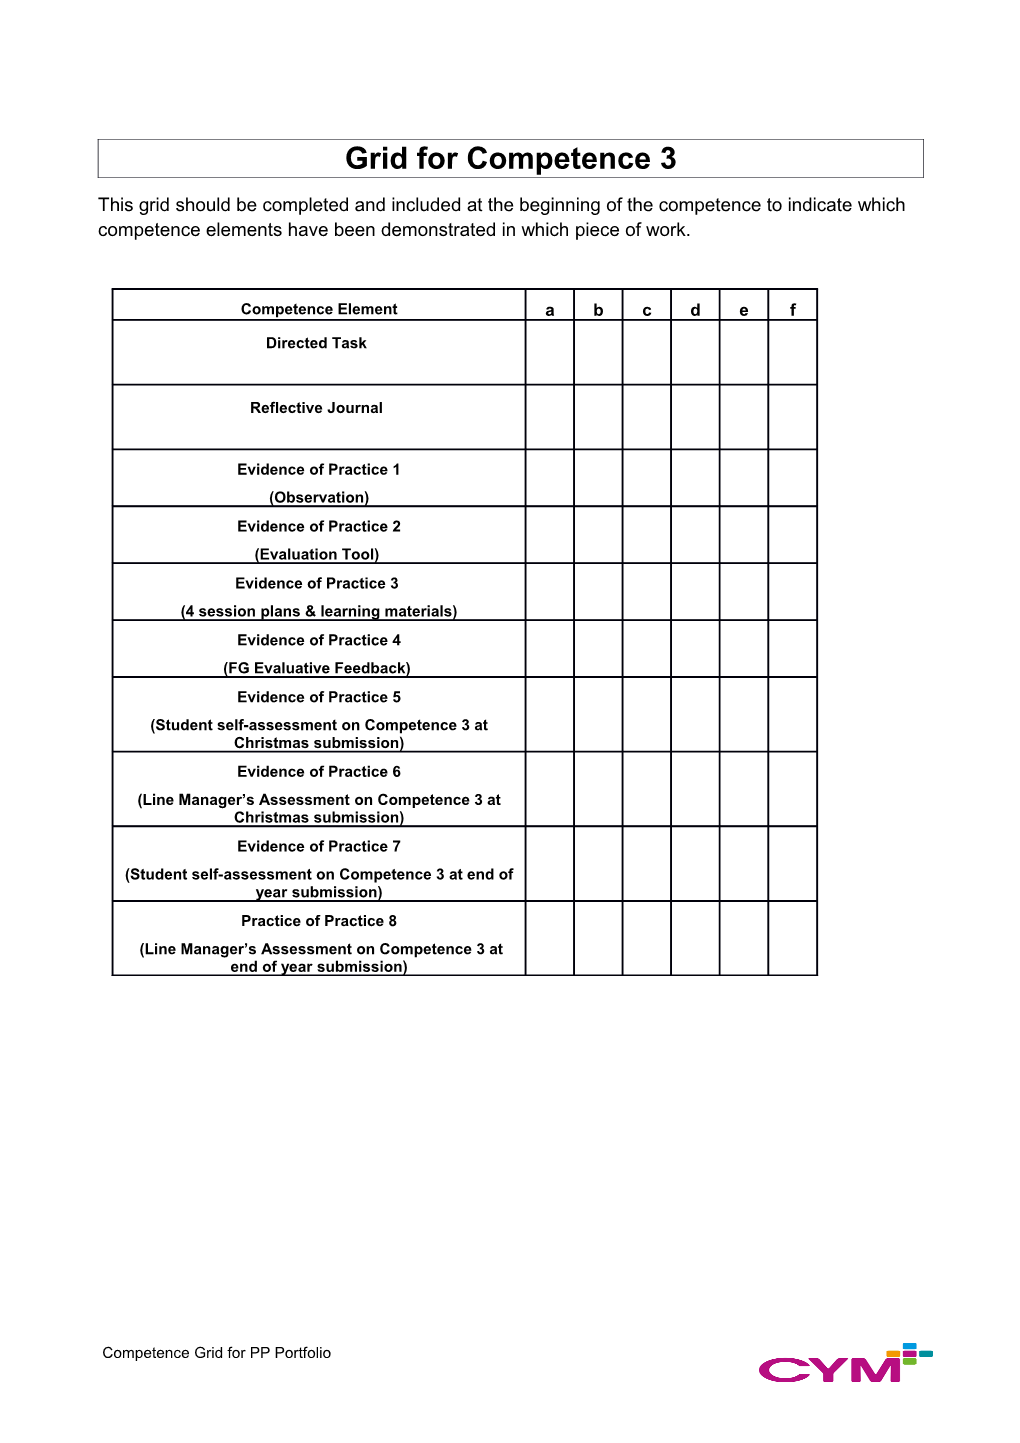 Grid for Competence 1